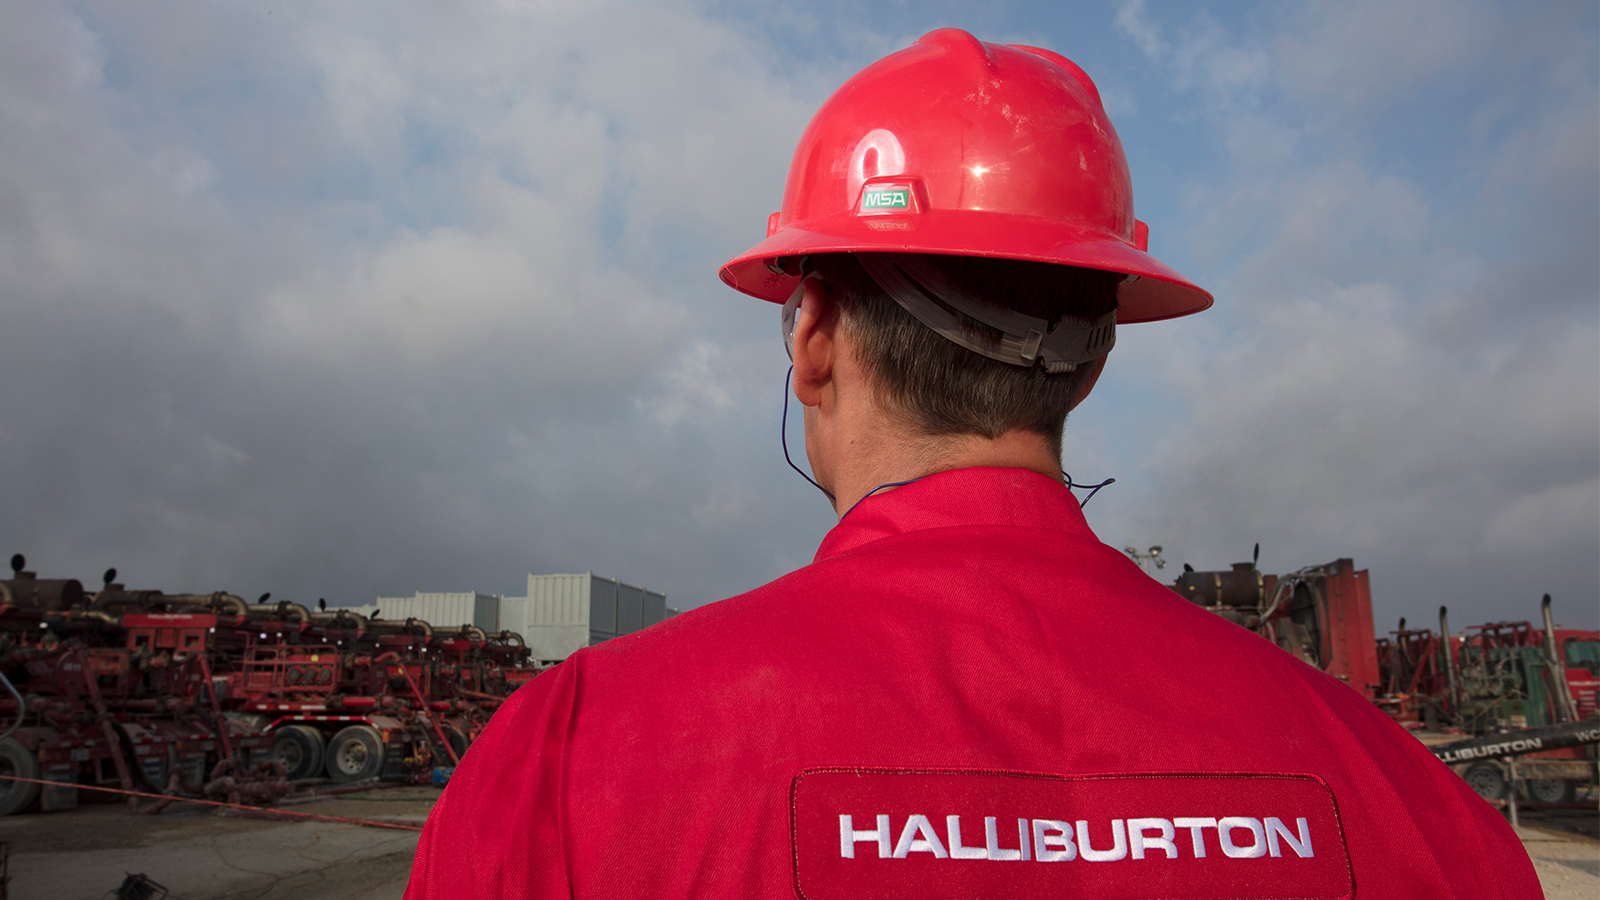 A man with halliburton t-shirt and a red cap